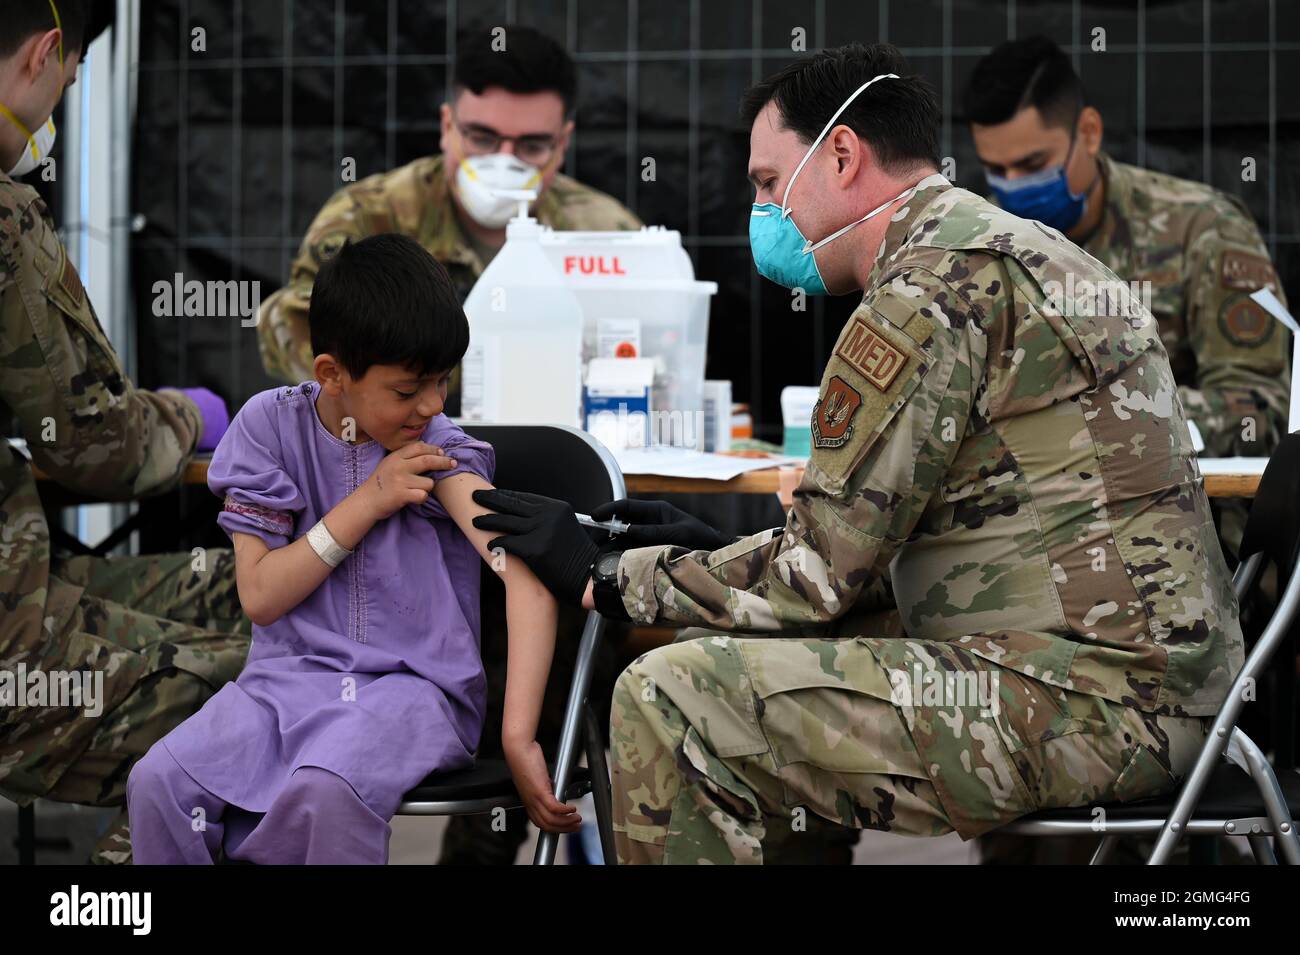 Ramstein-Miesenbach, Germany. 18th Sep, 2021. A U.S. Air Force airman administer Mumps, Measles and Rubella, and Chickenpox vaccines to an Afghan child evacuated from Kabul at Ramstein Air Base September 18, 2021 in Ramstein-Miesenbach, Germany. Ramstein is providing temporary lodging for evacuees from Afghanistan as part of Operation Allies Refuge. Credit: TSgt. Devin Nothstine/U.S. Air Force/Alamy Live News Stock Photo